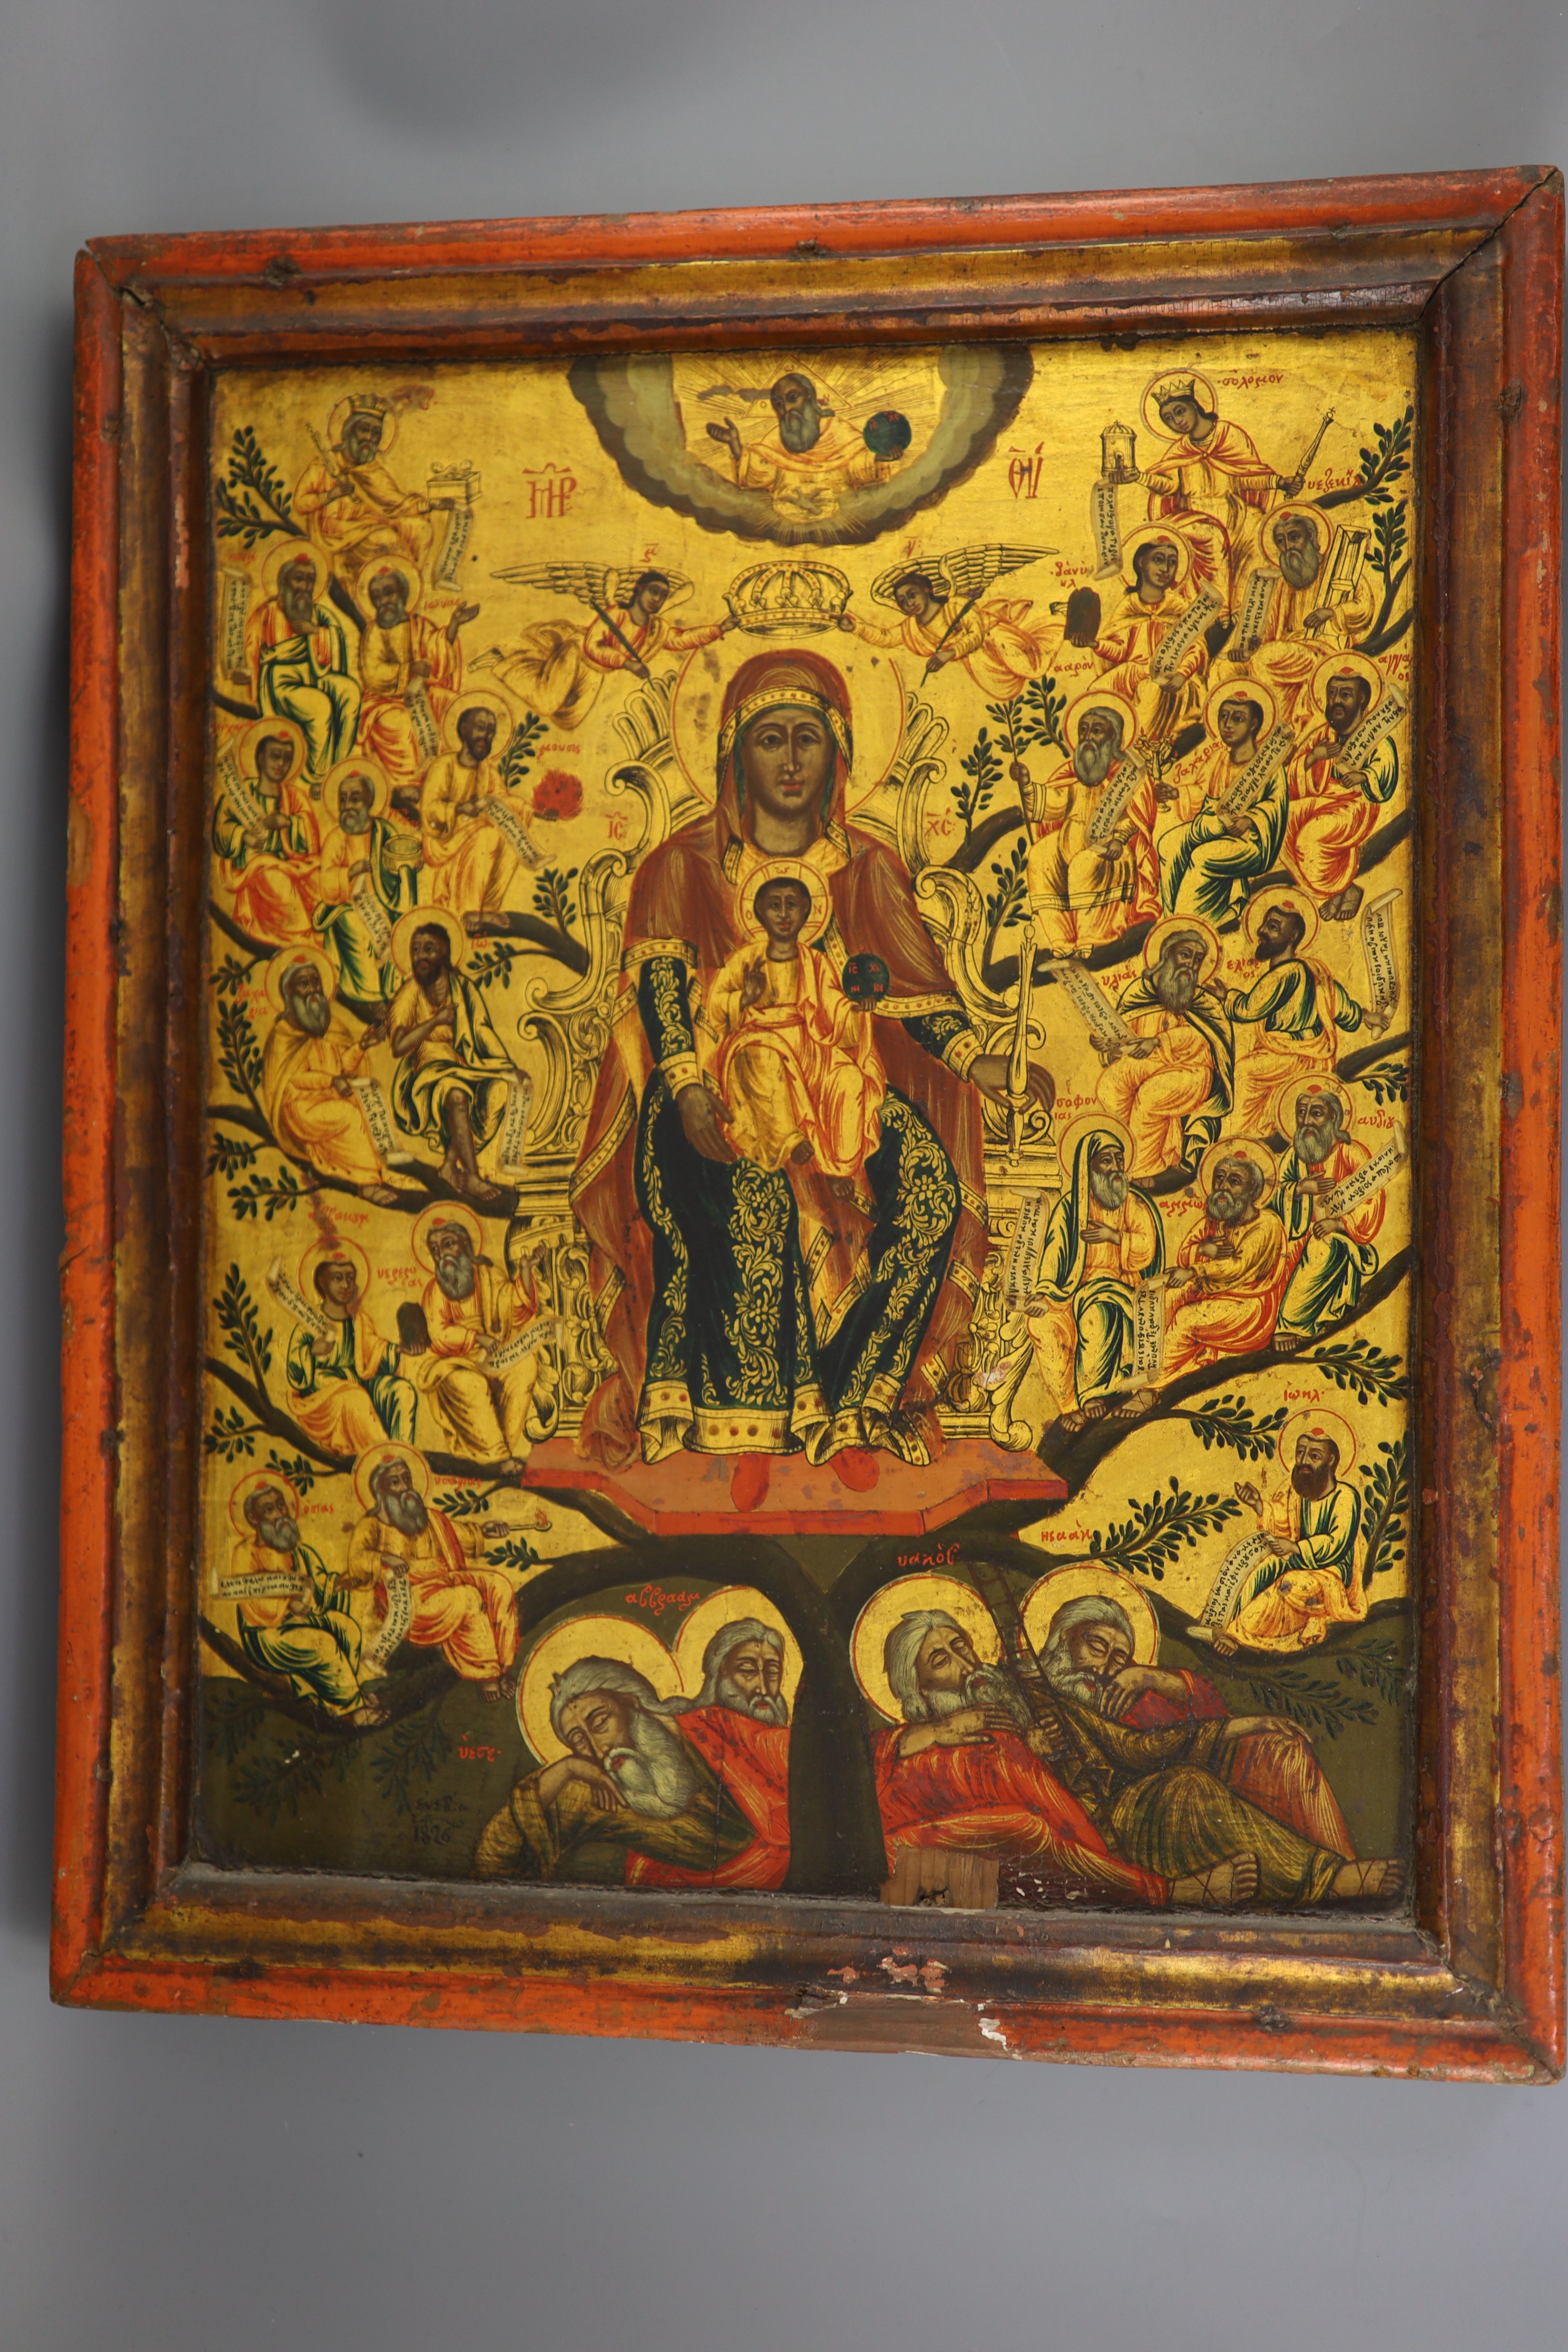 An early 19th century tempera on wooden panel icon, depicting the Virgin Mary and the Infant